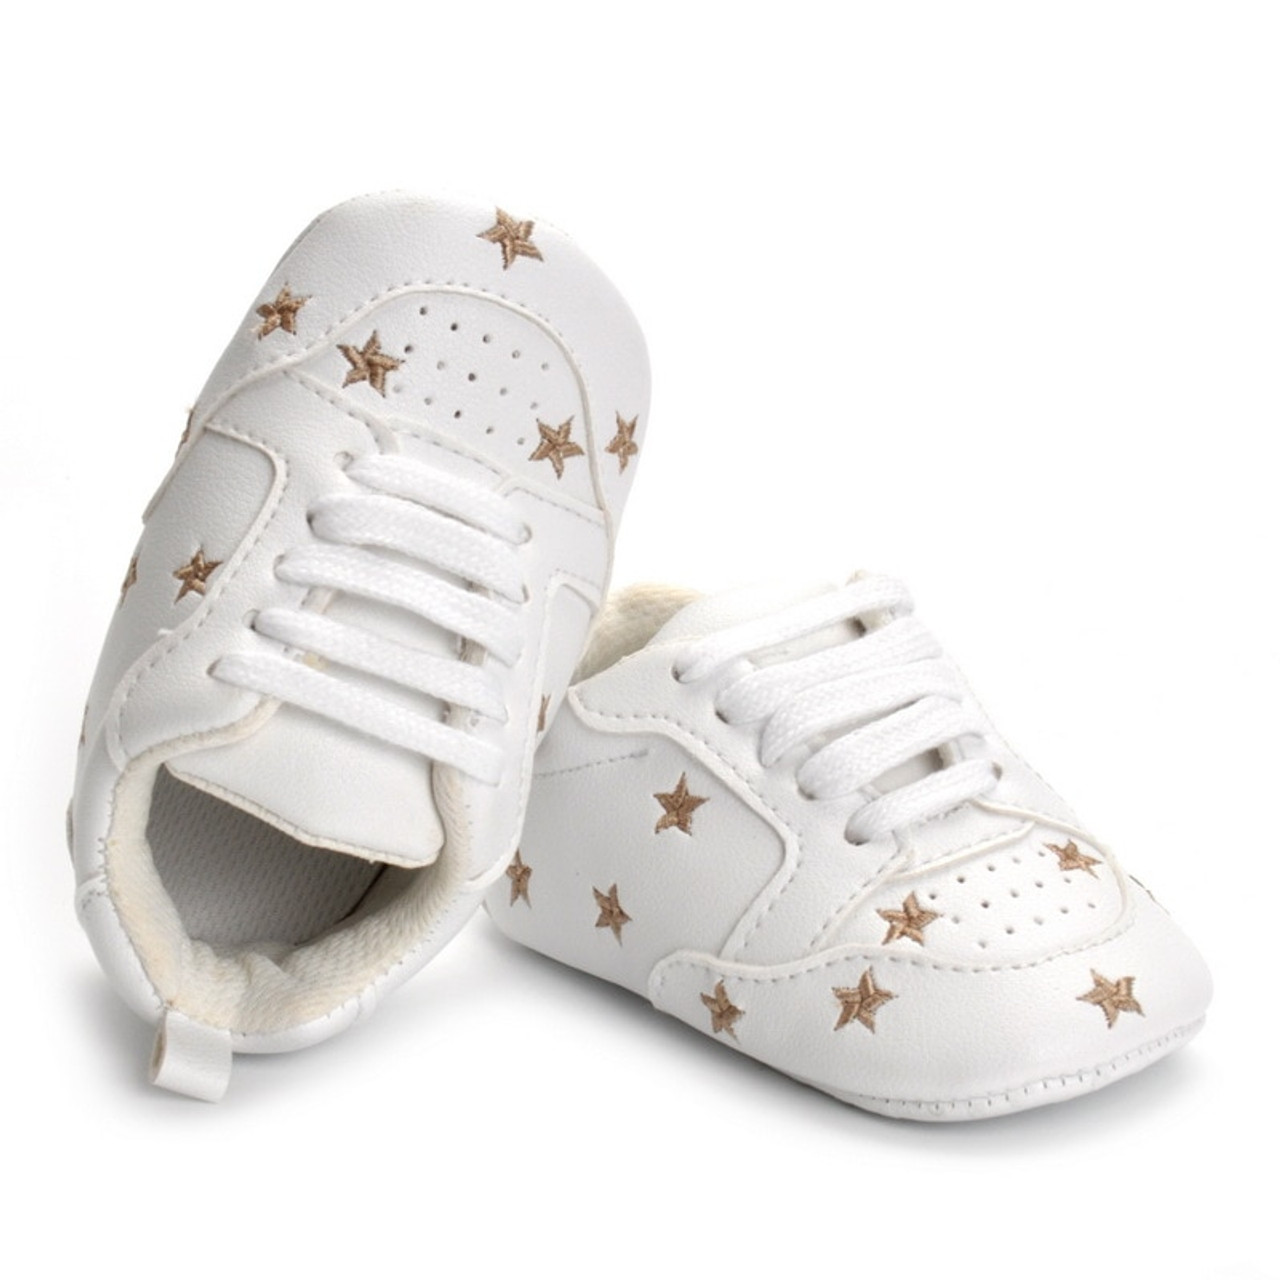 leather bottom baby shoes